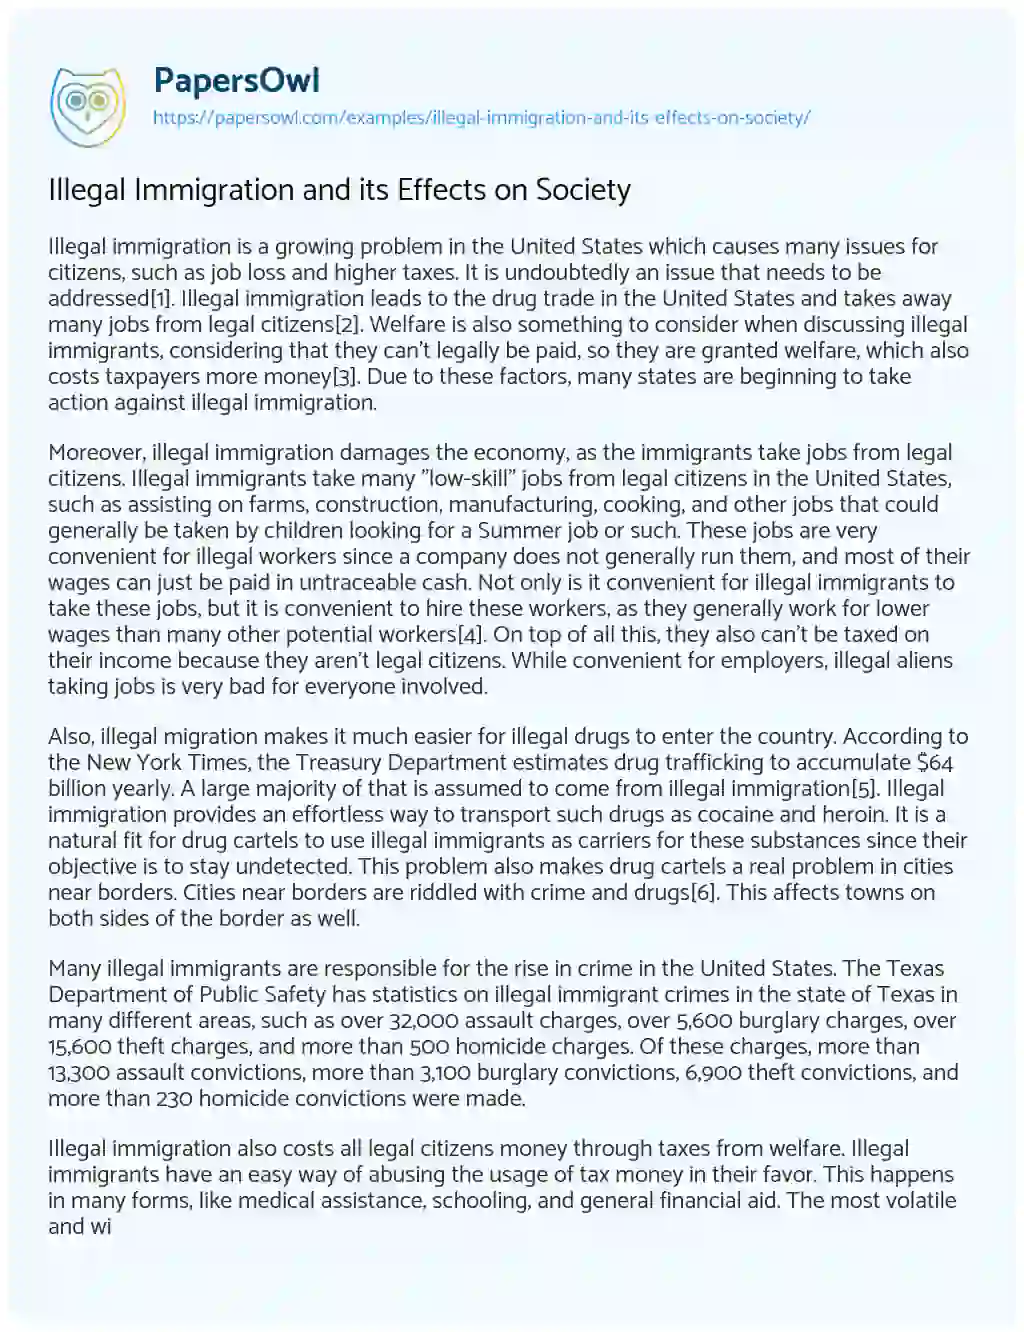 Essay on Illegal Immigration and its Effects on Society